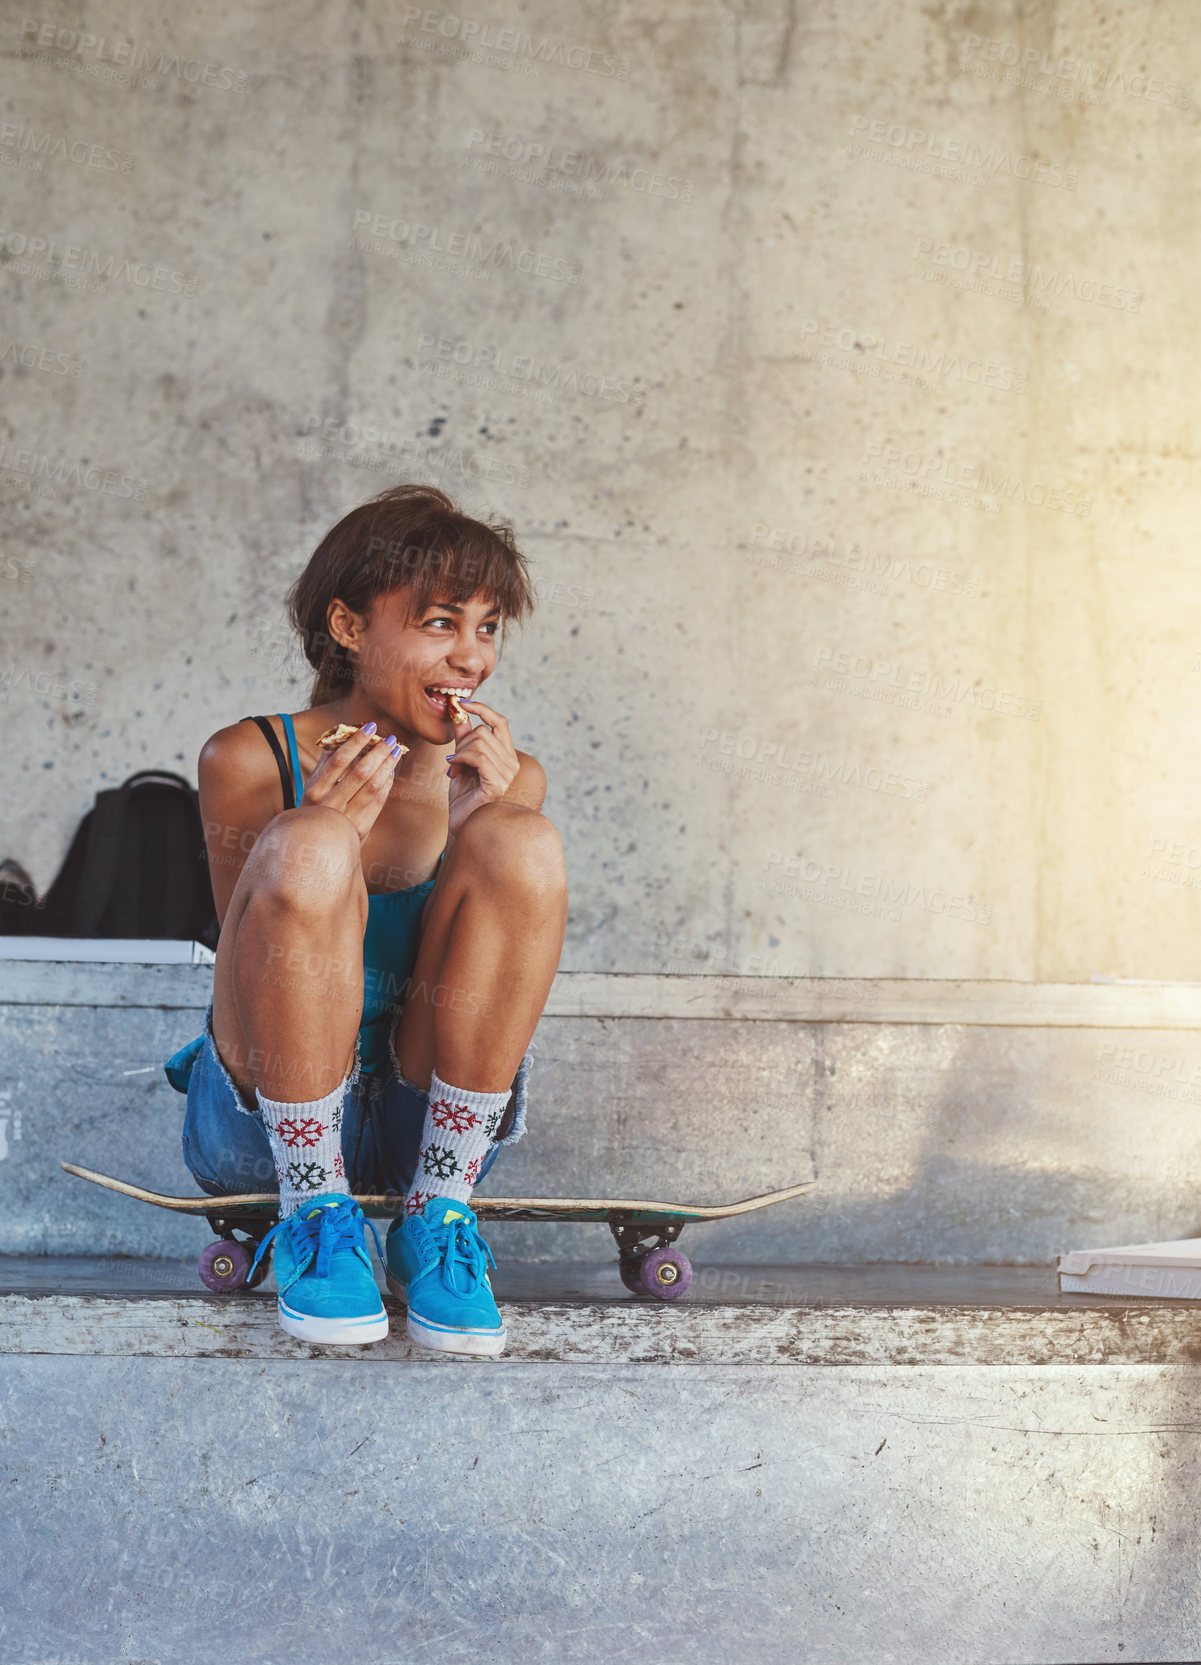 Buy stock photo Shot of a young woman sitting on her skateboard